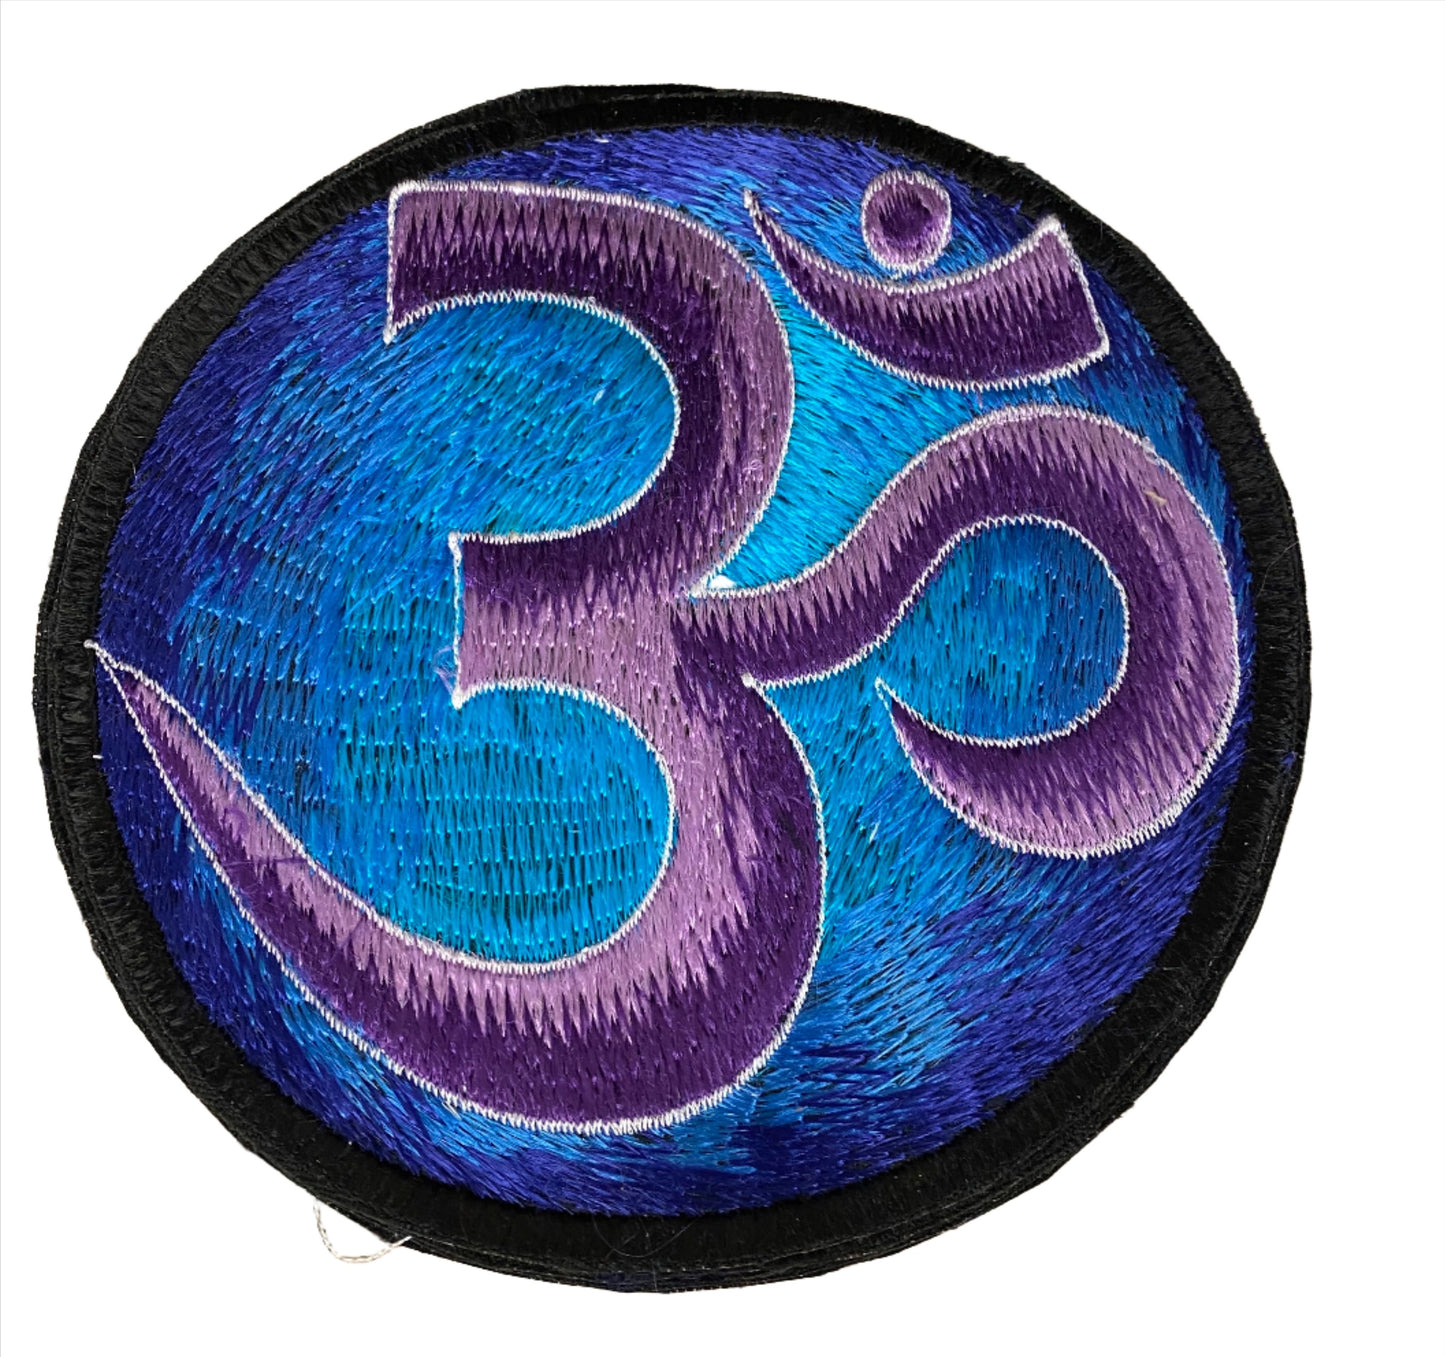 Handmade Blues Om Mandala Embroidered Patches